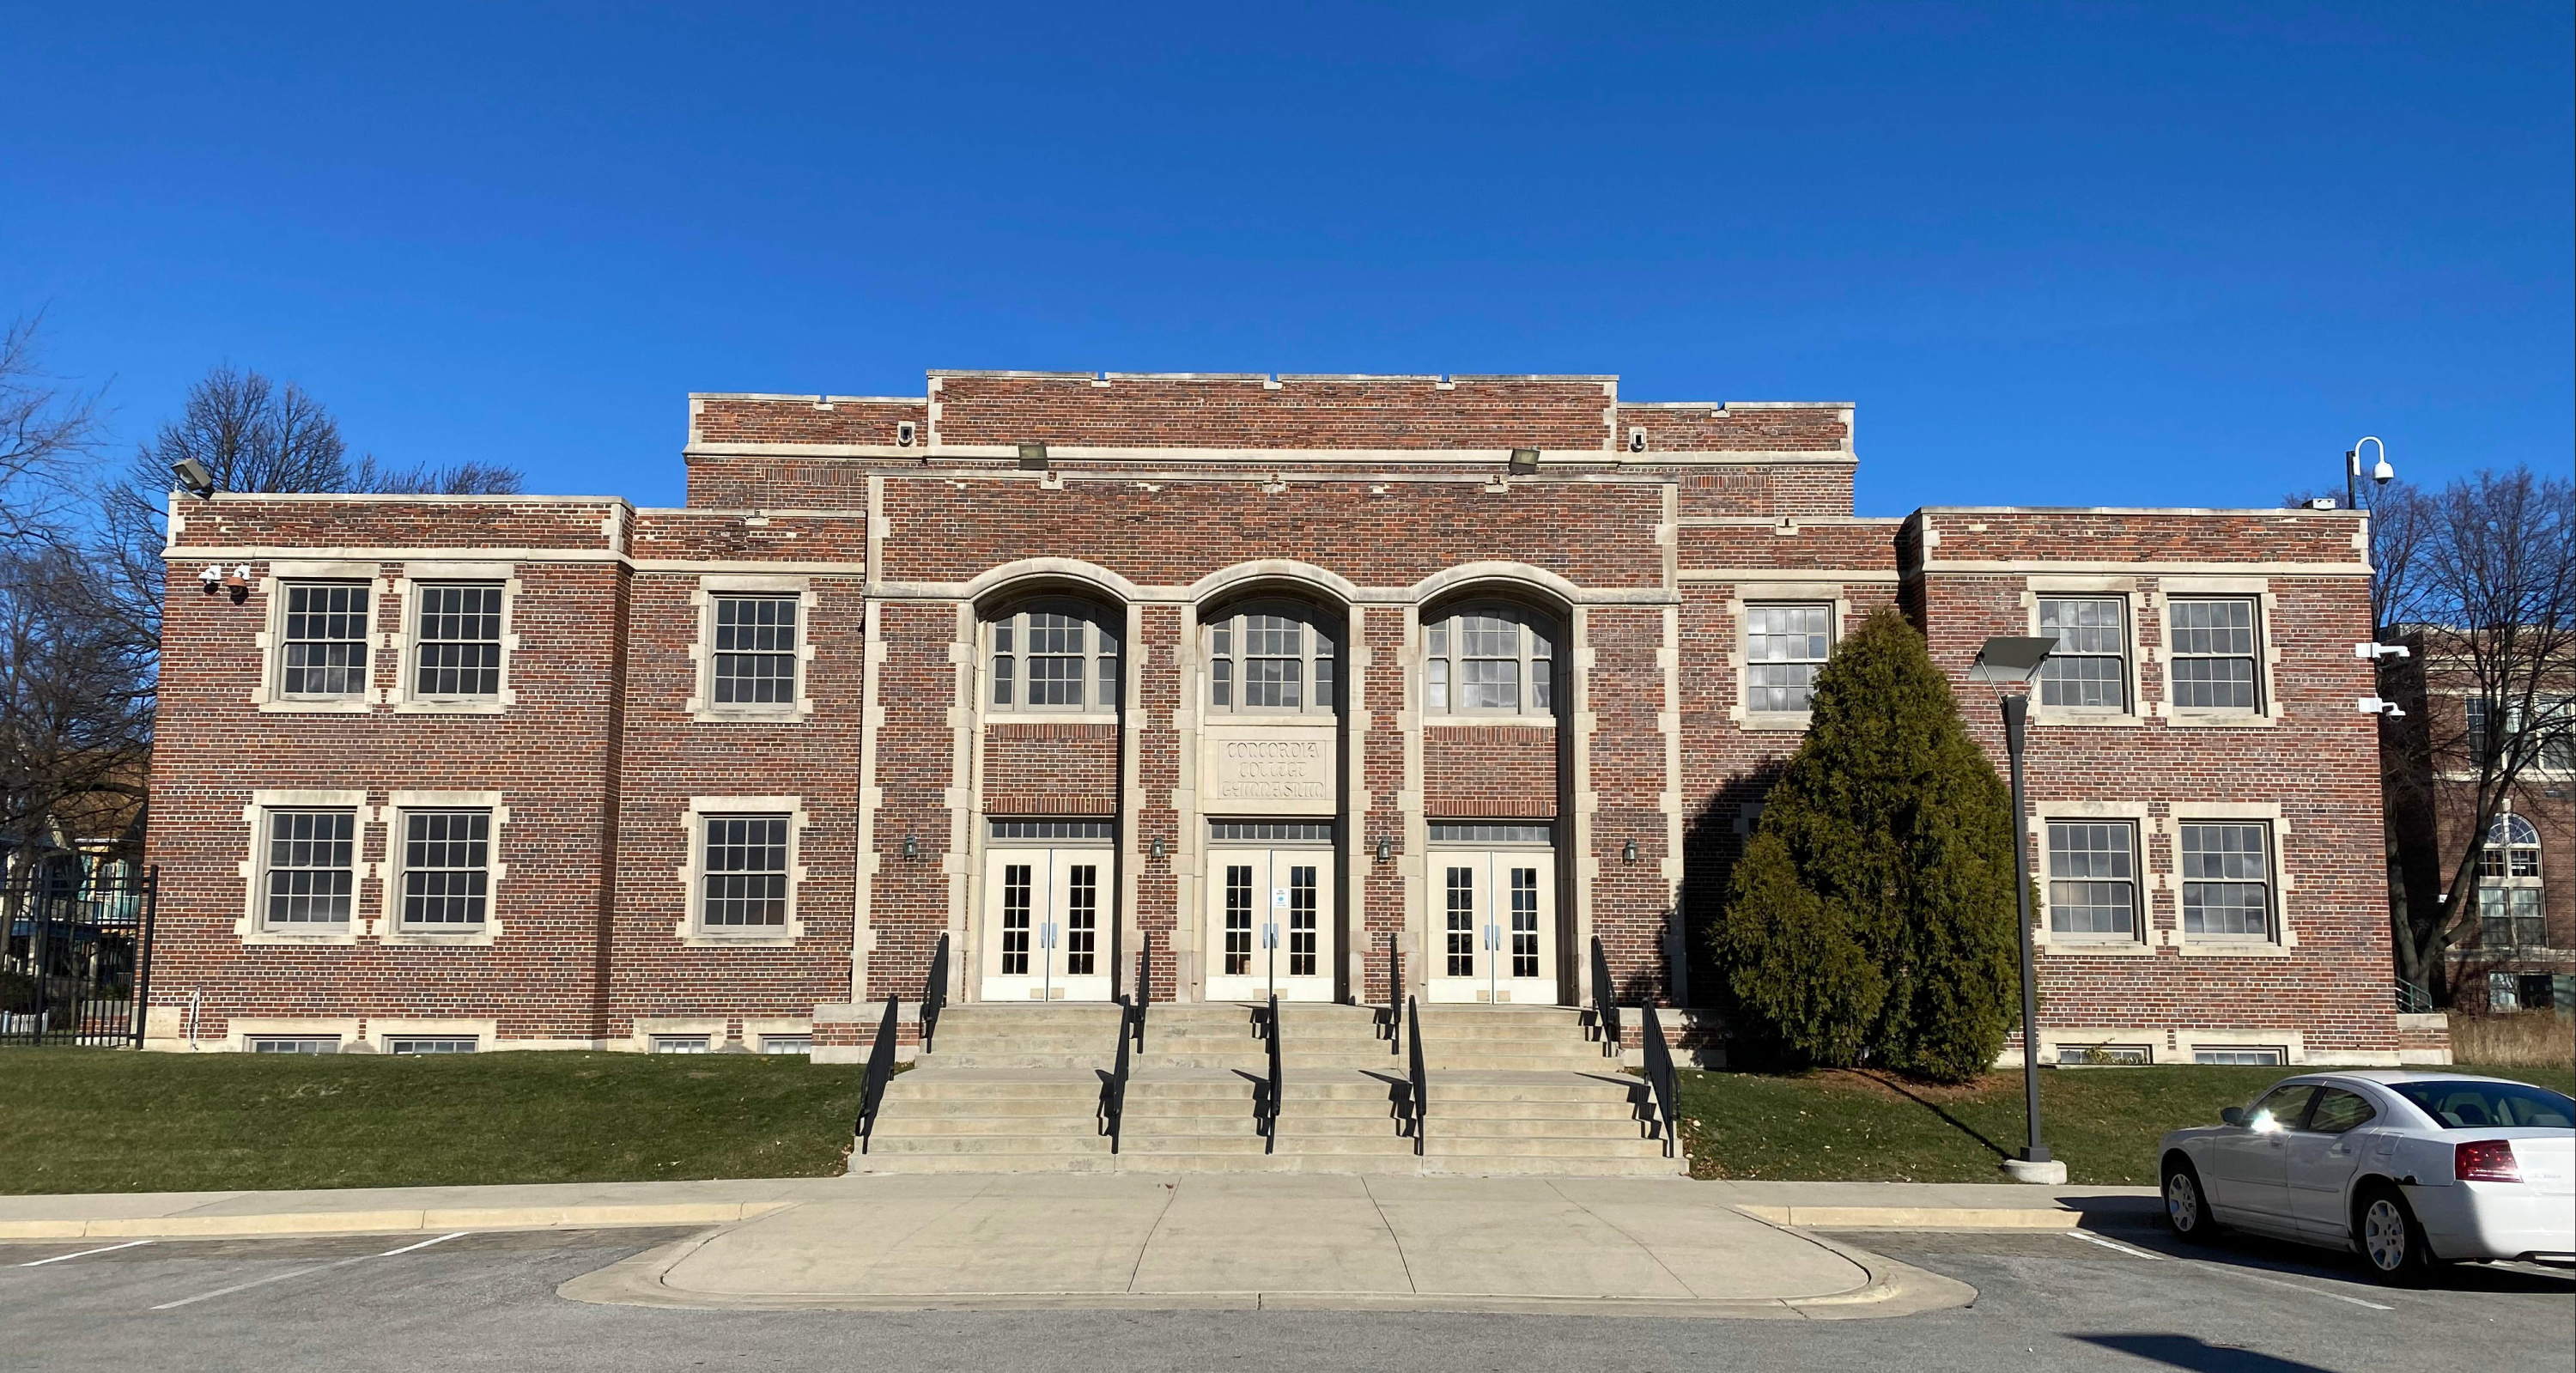 Two story brick gymnasium with "Concordia College Gymnasium" in limestone above the door.